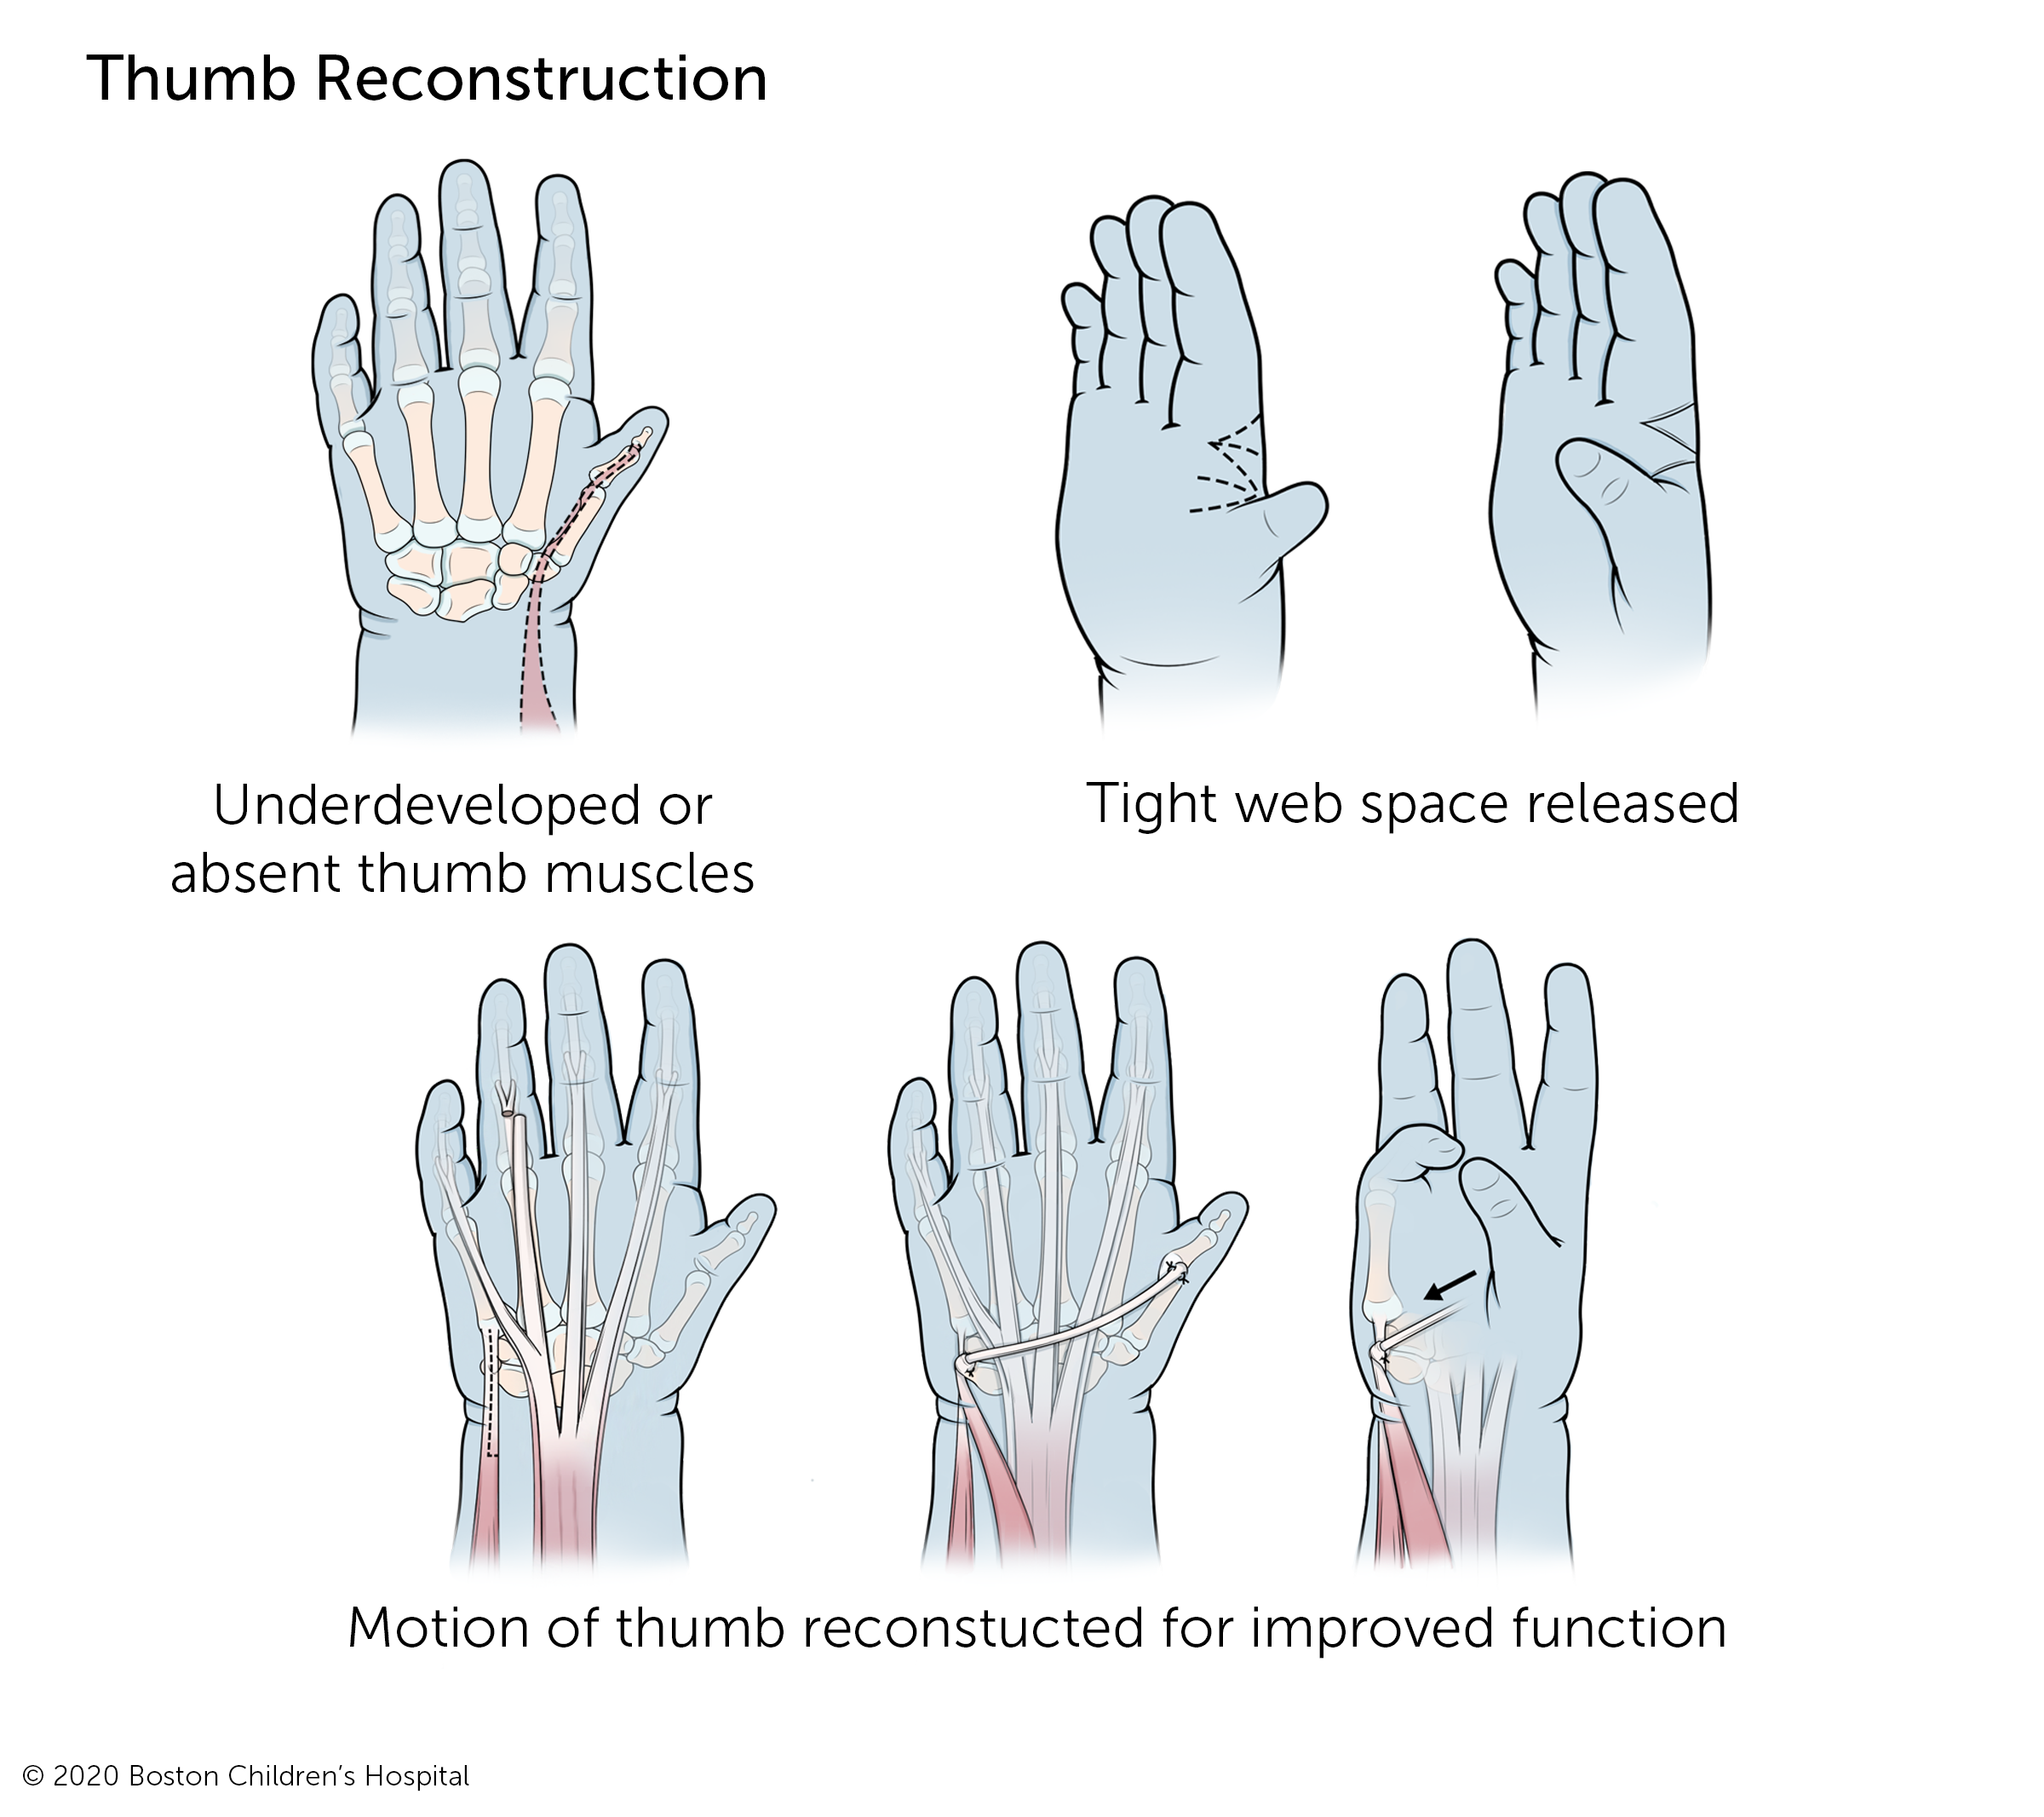 For thumb reconstruction, underdeveloped or absent thumb muscles are reconstructed and the tight skin between the thumb and forefinger are released for improved thumb function.